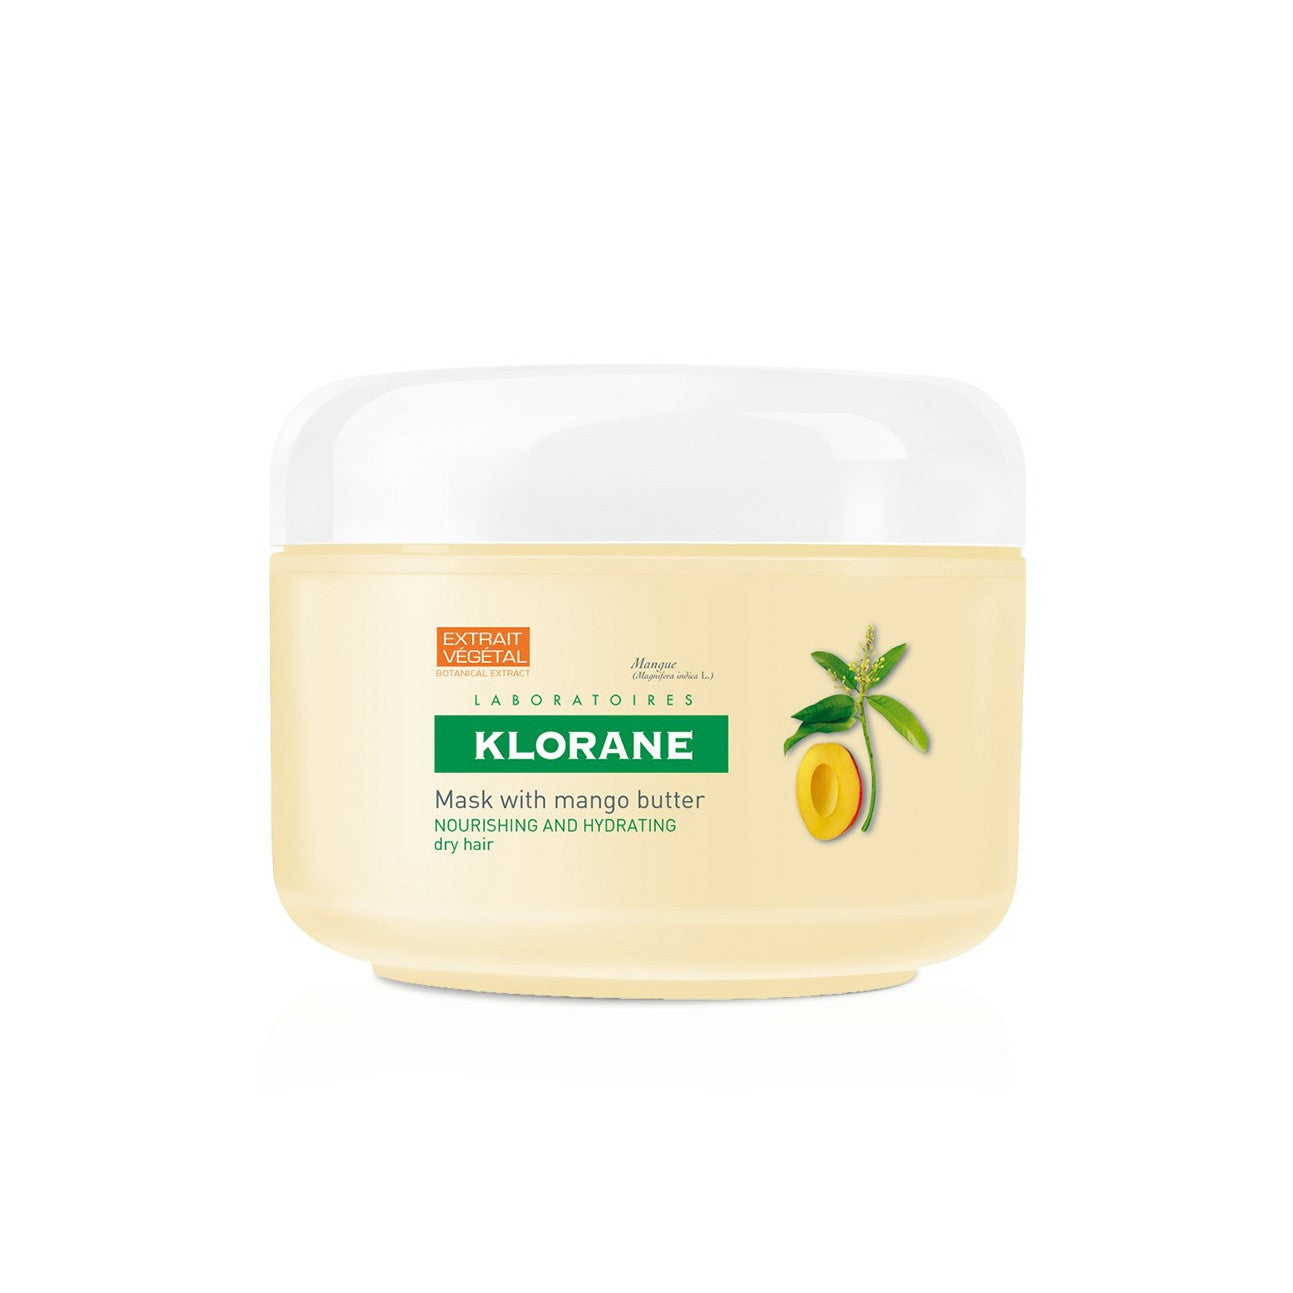 Klorane Mask with Mango Butter, Conditioner - New London Pharmacy